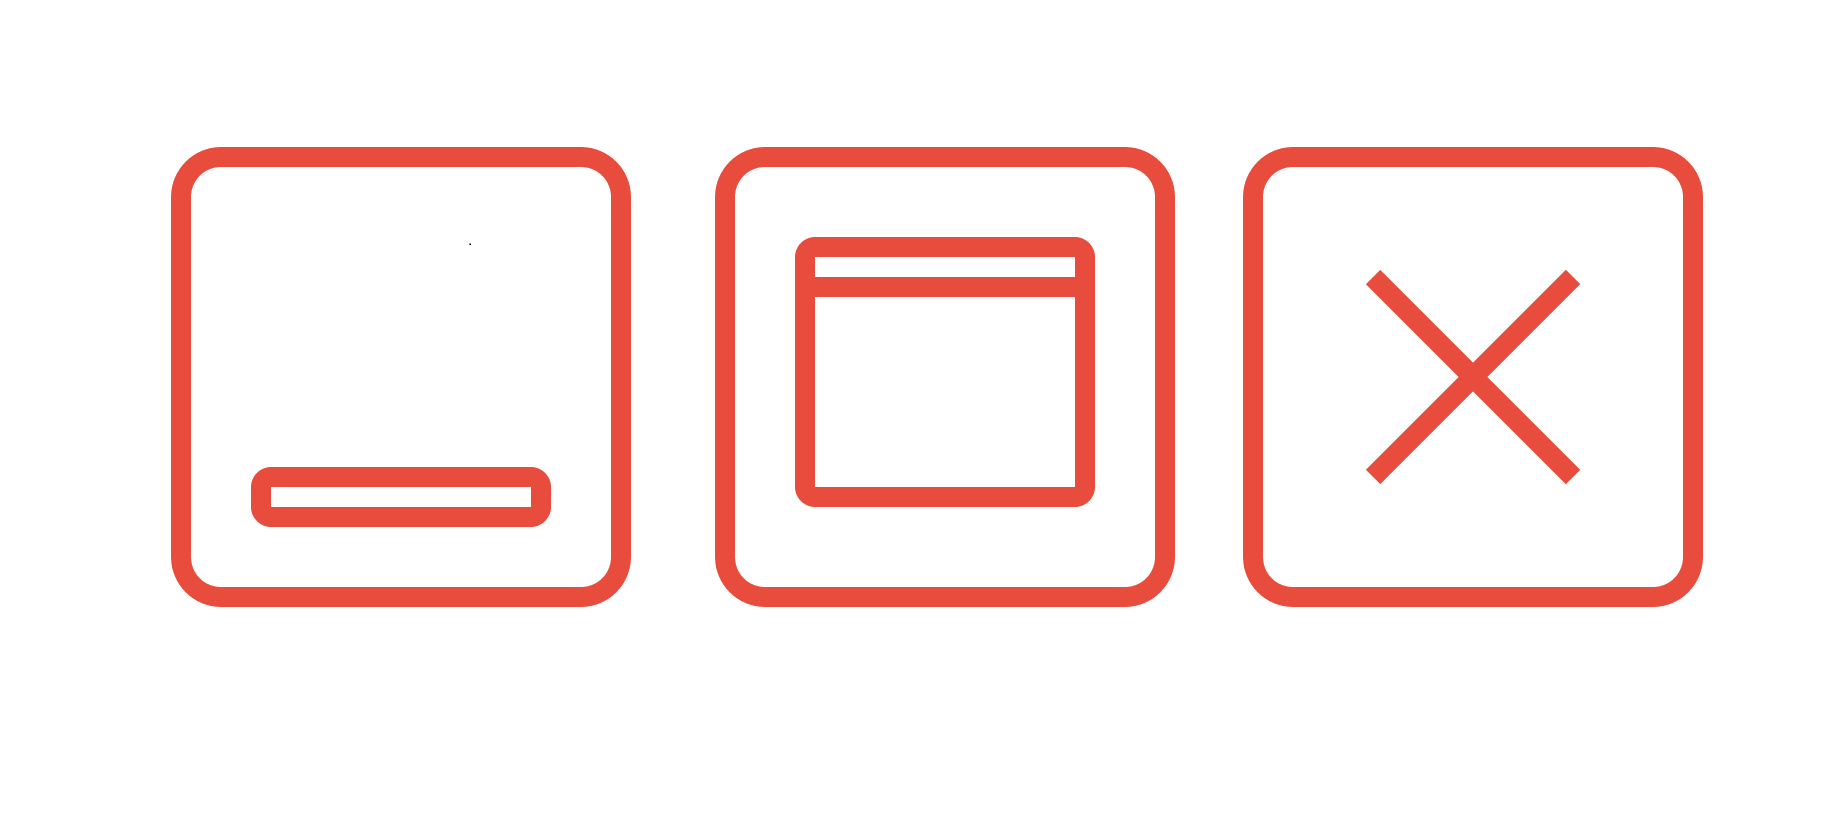 Close Window Icon - free download, PNG and vector